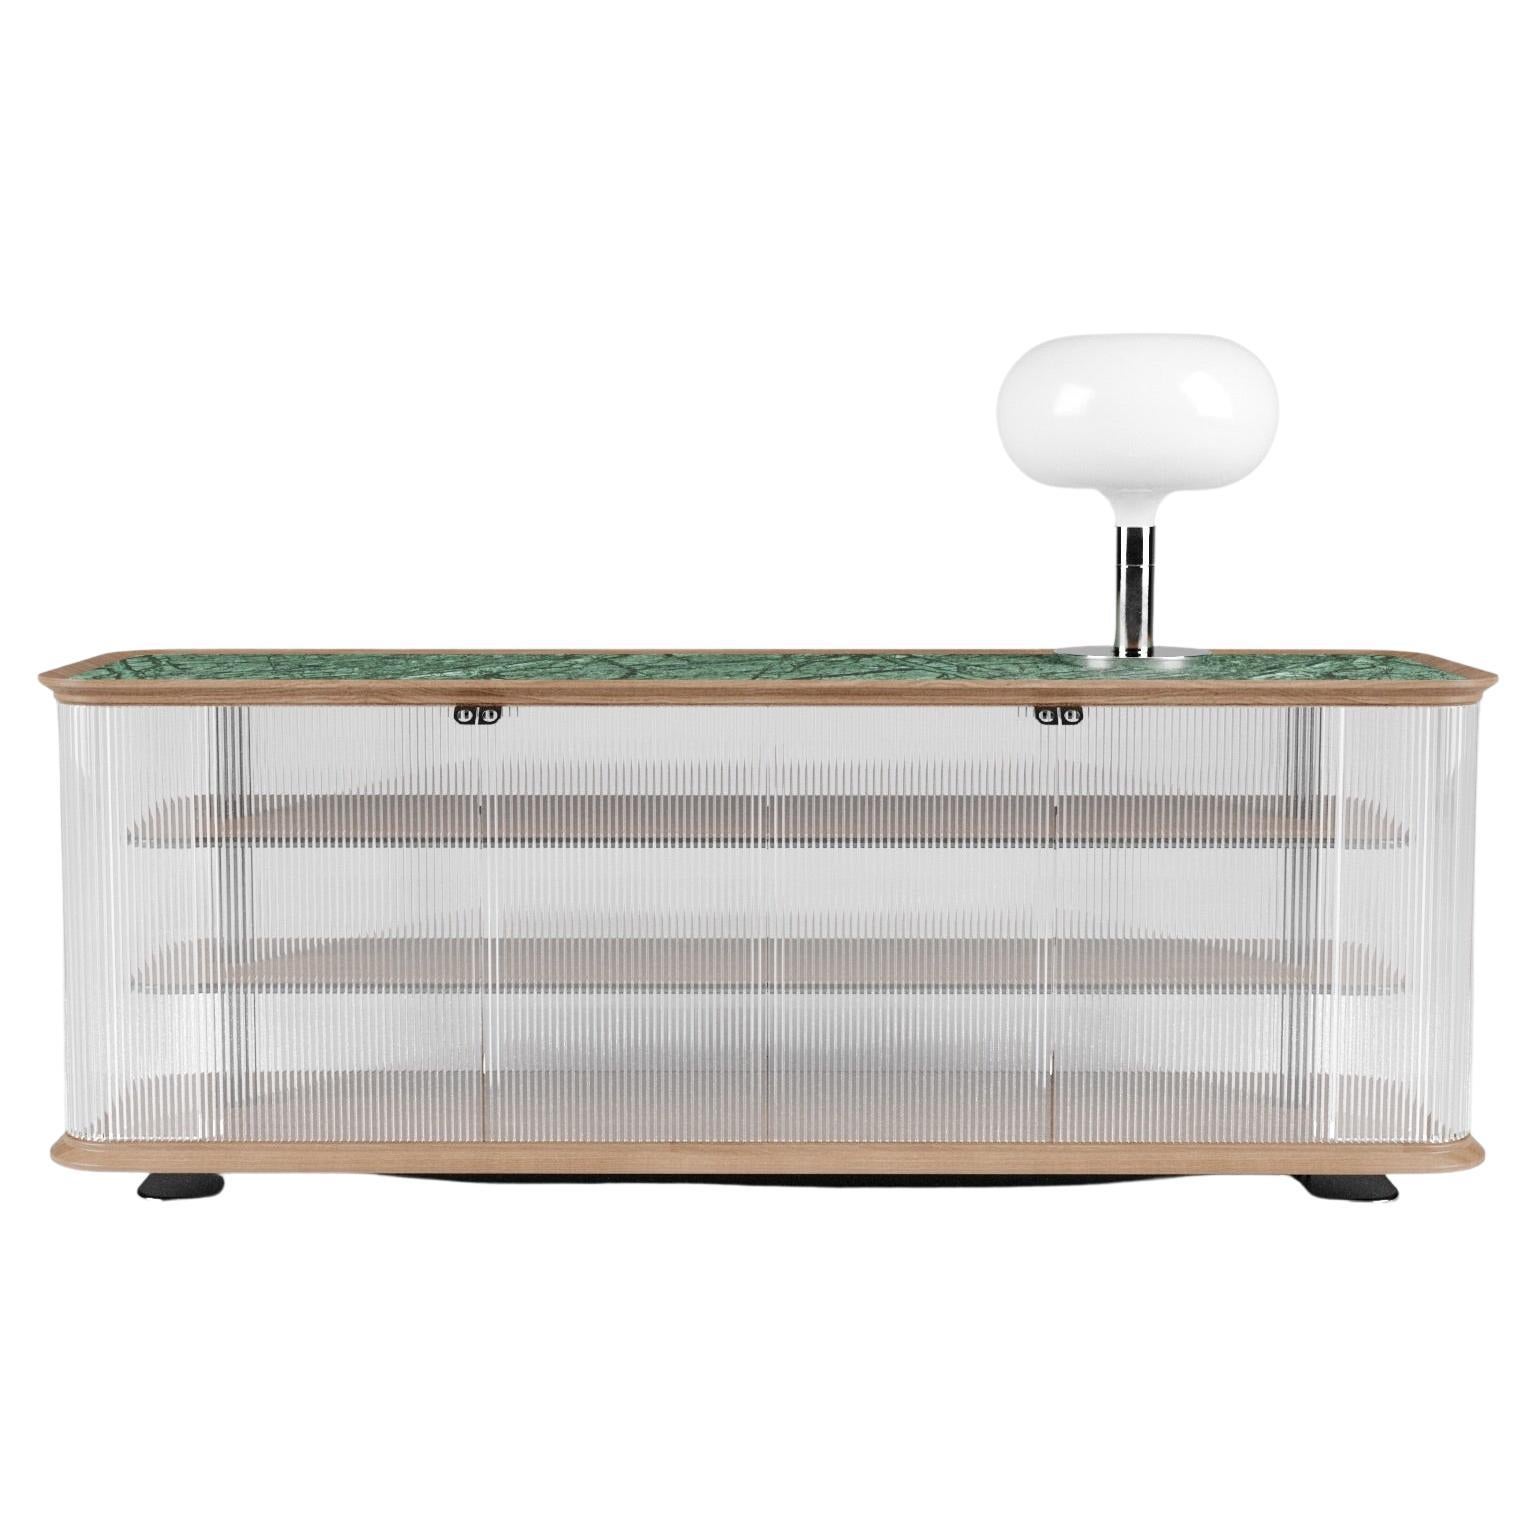 Nemesi #1 is a sideboard, designed by Sagaría.

The clean geometry and the authentic eloquence of the material, the fluted glass mixed with the honed Guatemala marble, are the intrinsic feature that underlines the sinuous, plastic shapes of Nemesi